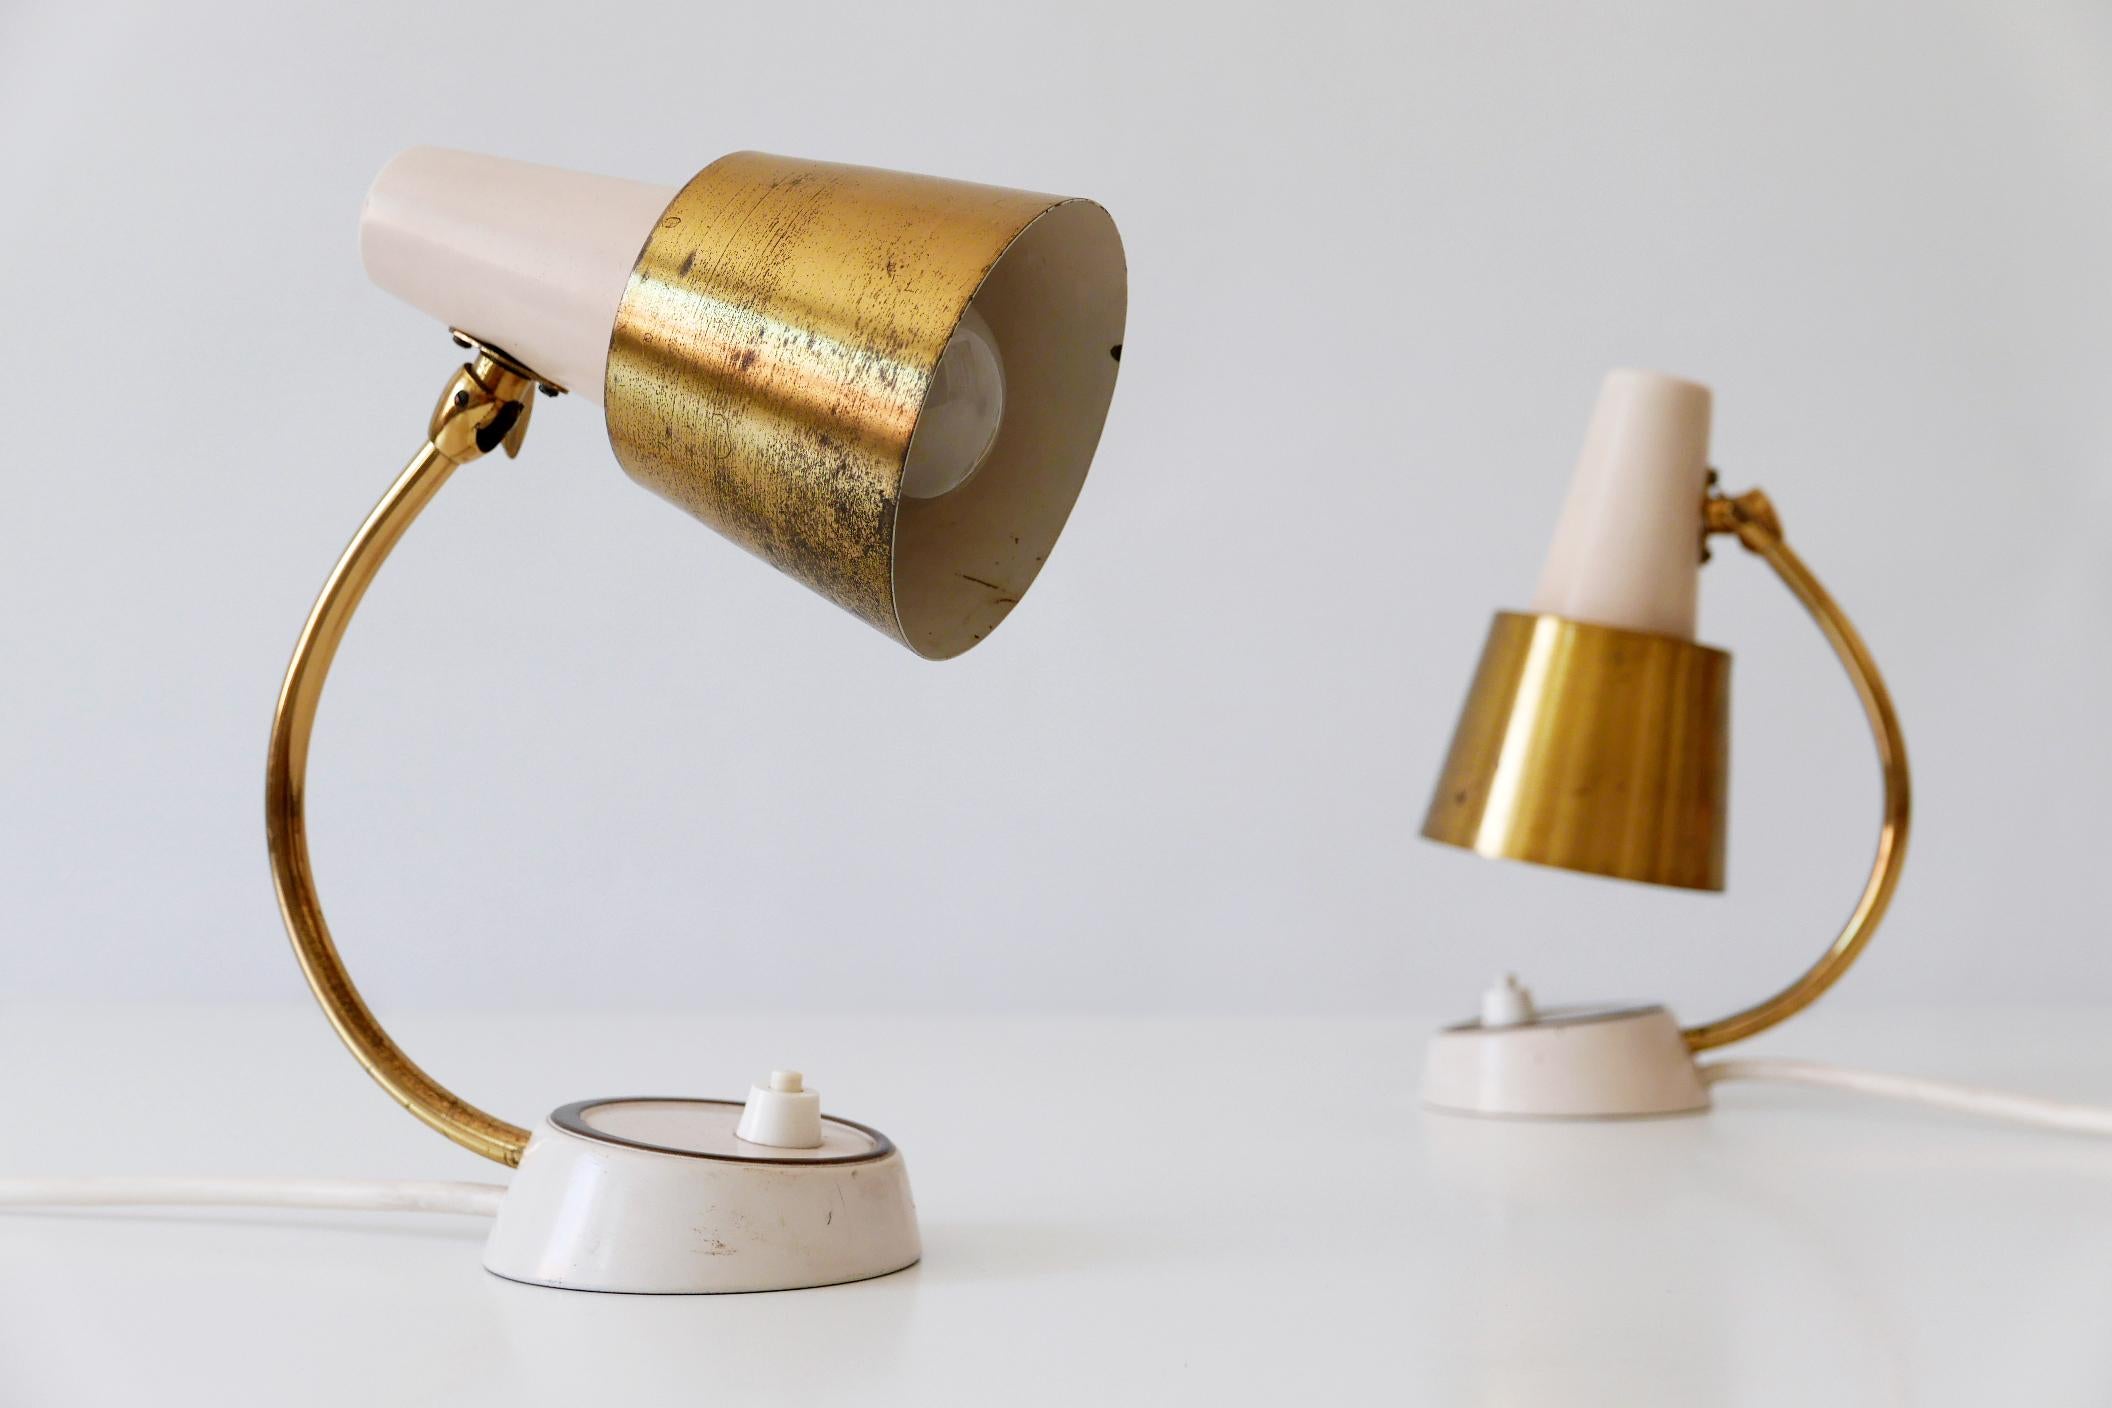 Set of Two Mid-Century Modern Bedside Table Lamps or Wall Lights, 1950s, Germany For Sale 7